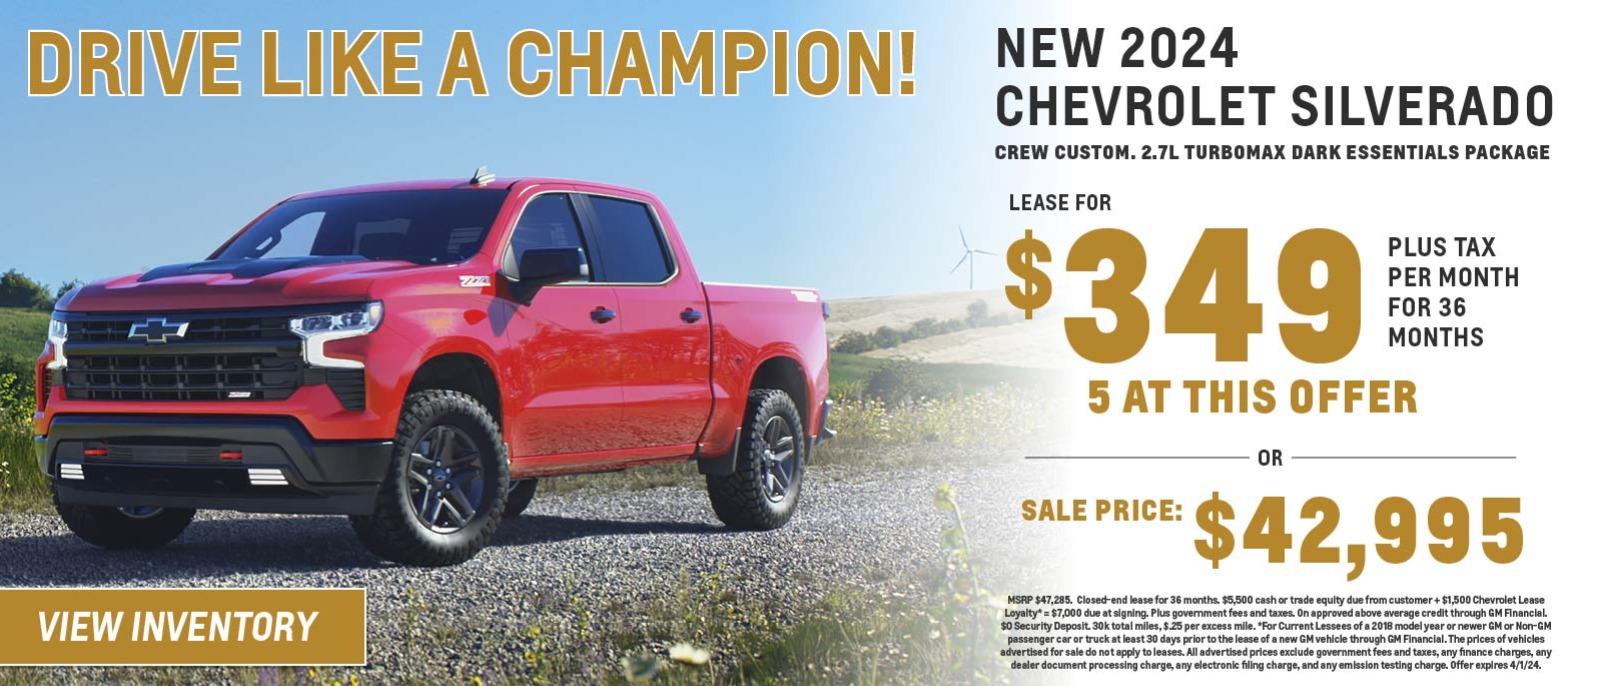 New 2024 Chevrolet Silverado
Lease for $349 plus tax per month for 36 months
5 at this offer
0r
Sale Price $42,995